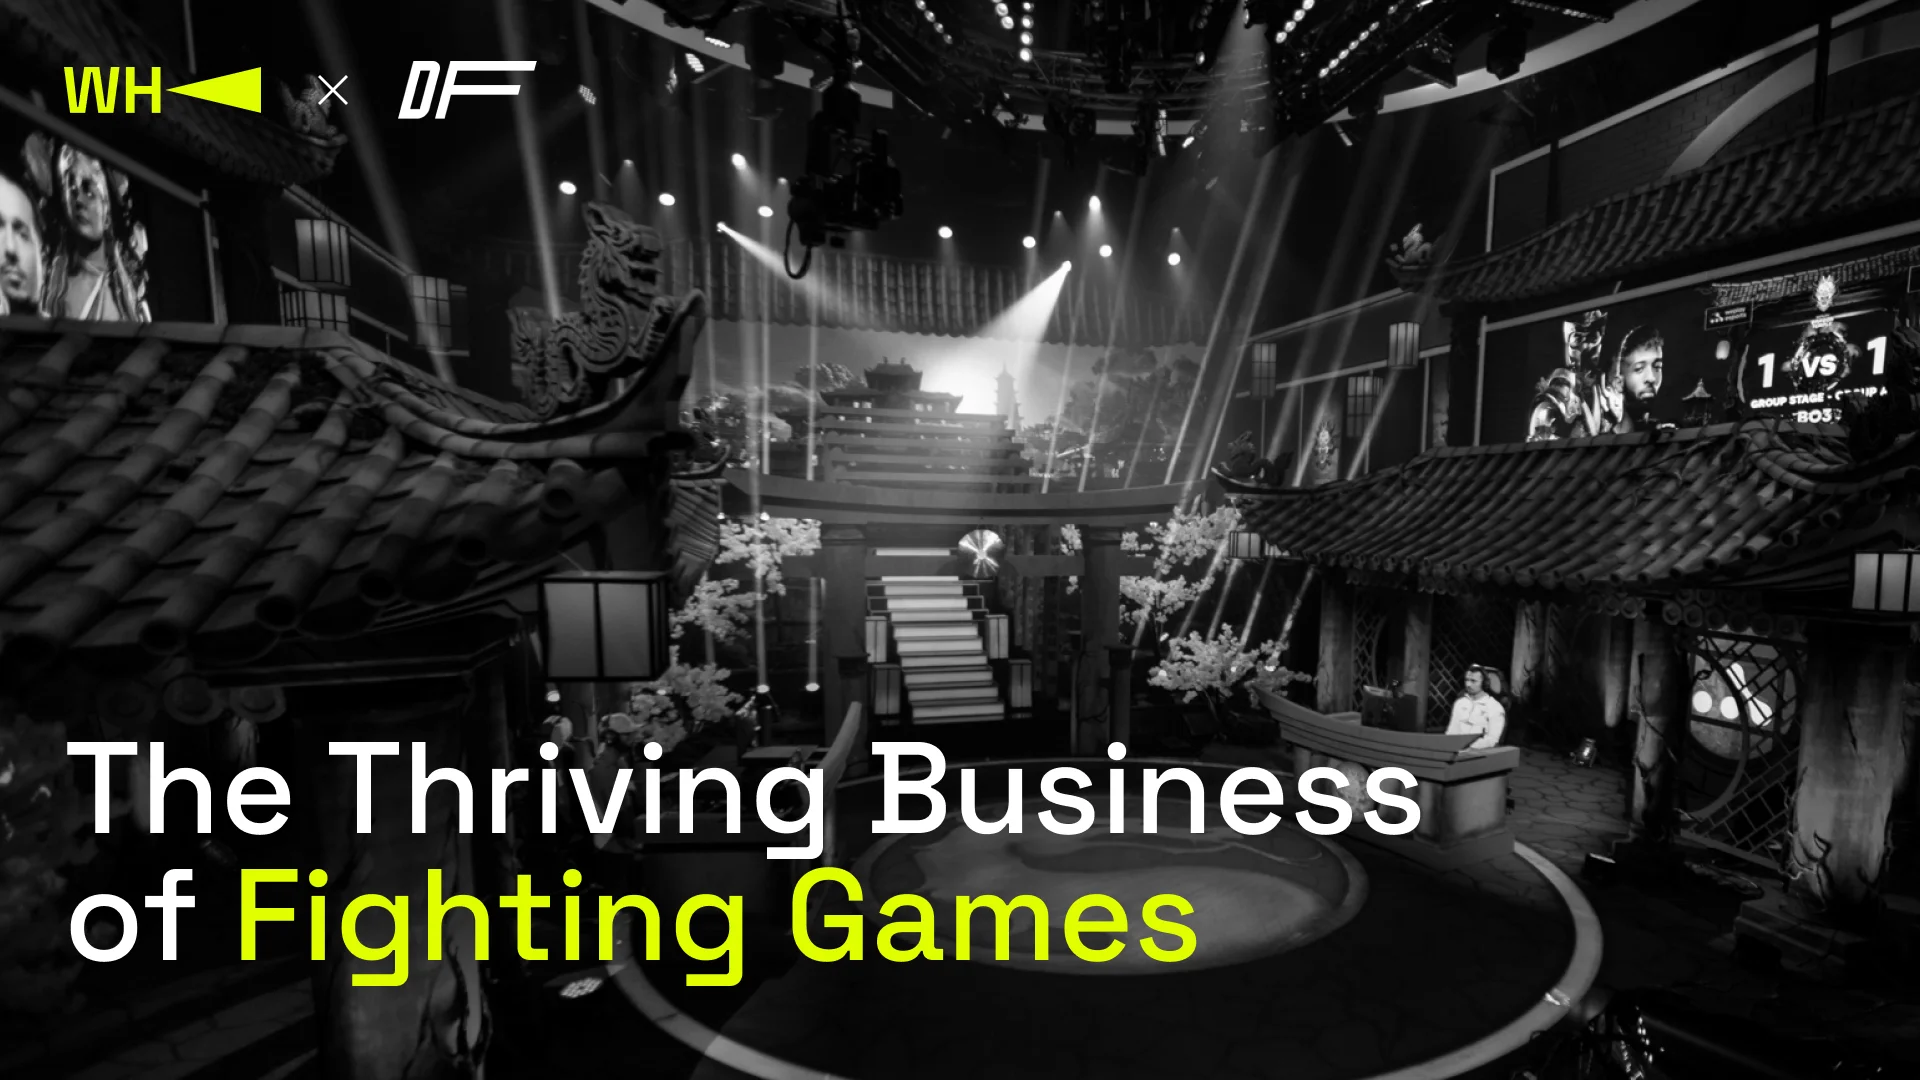 The Thriving Business of Fighting Games